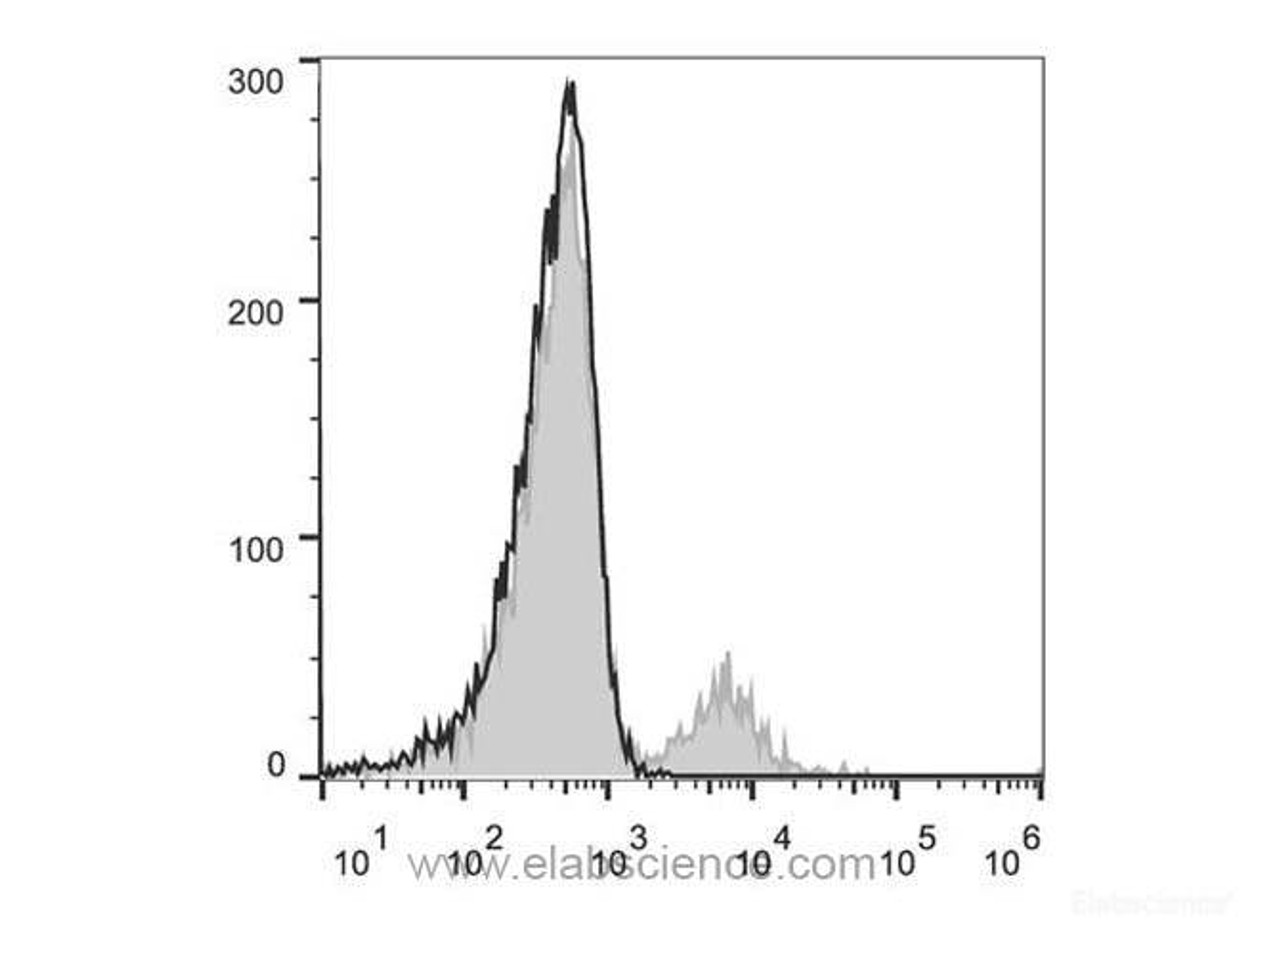 Human peripheral blood lymphocytes are stained with Anti-Human CD56 Monoclonal Antibody(PE Conjugated)(filled gray histogram). Unstained lymphocytes (empty black histogram) are used as control.